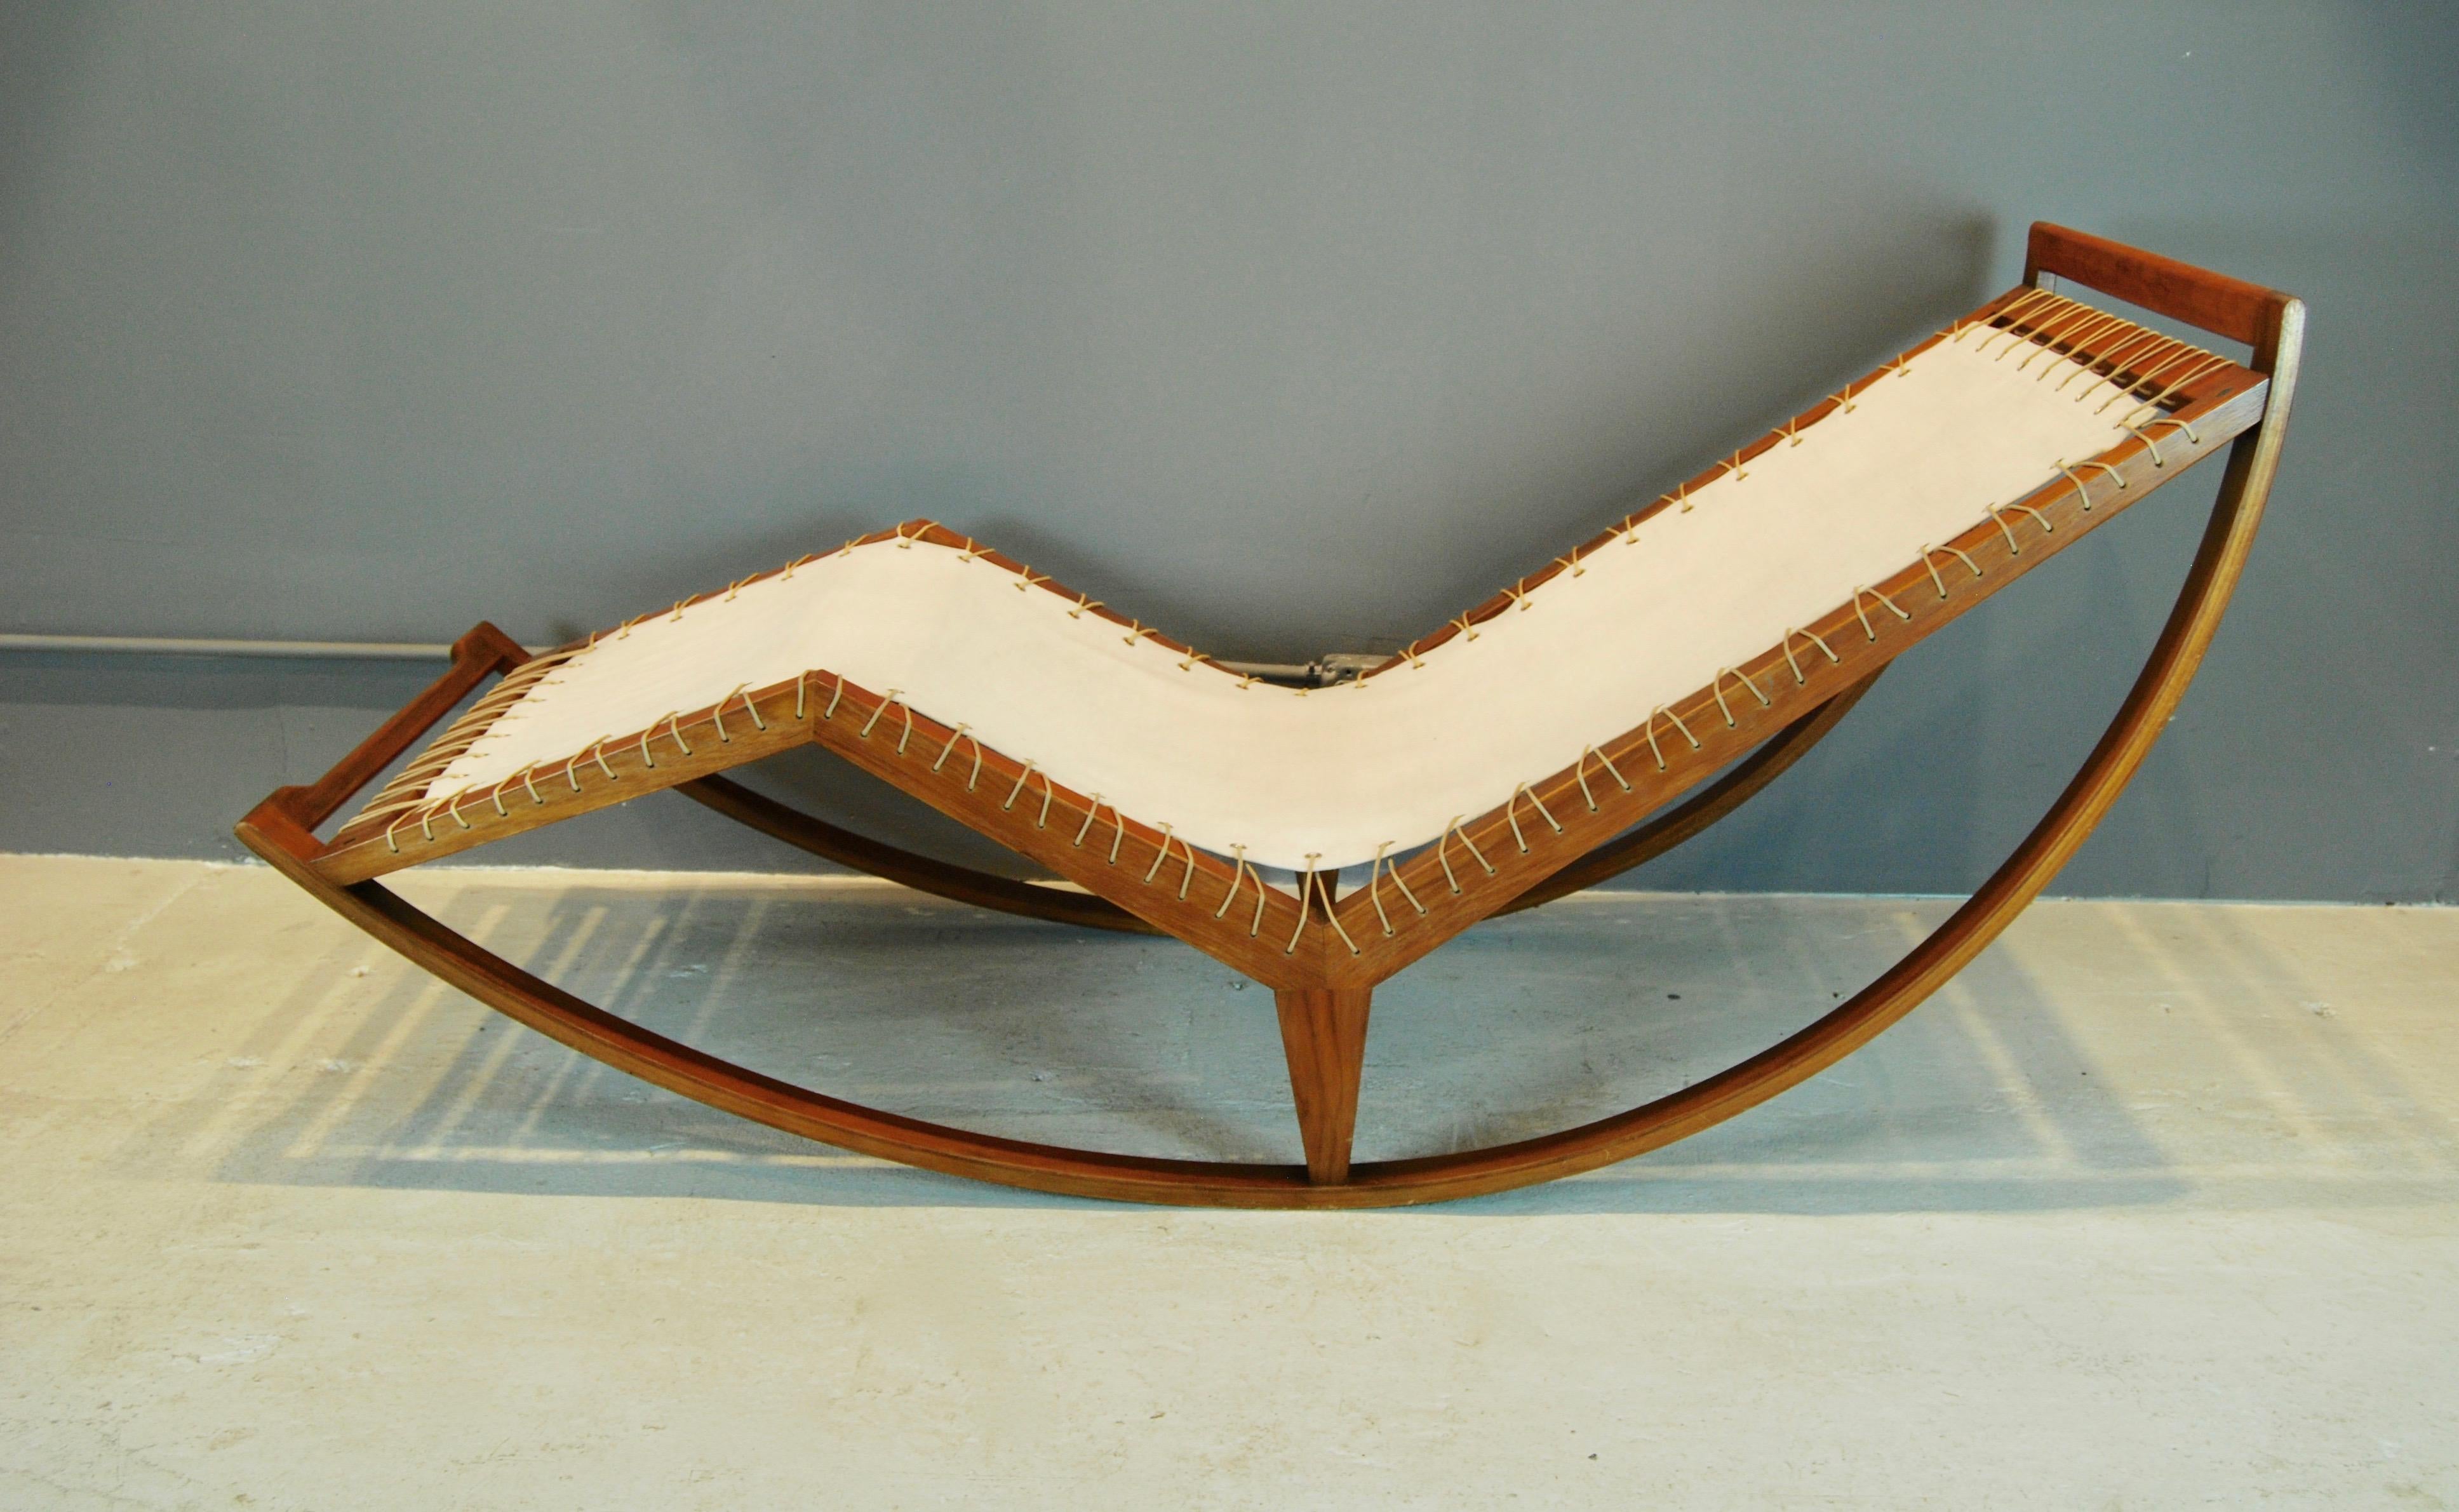 Franco Albini rocking chaise lounge, constructed of walnut, canvas and cord and manufactured by Poggi, Pavia, Italy, 1956. Chaise is in original condition with no damage or repairs.
Accompanied with a 